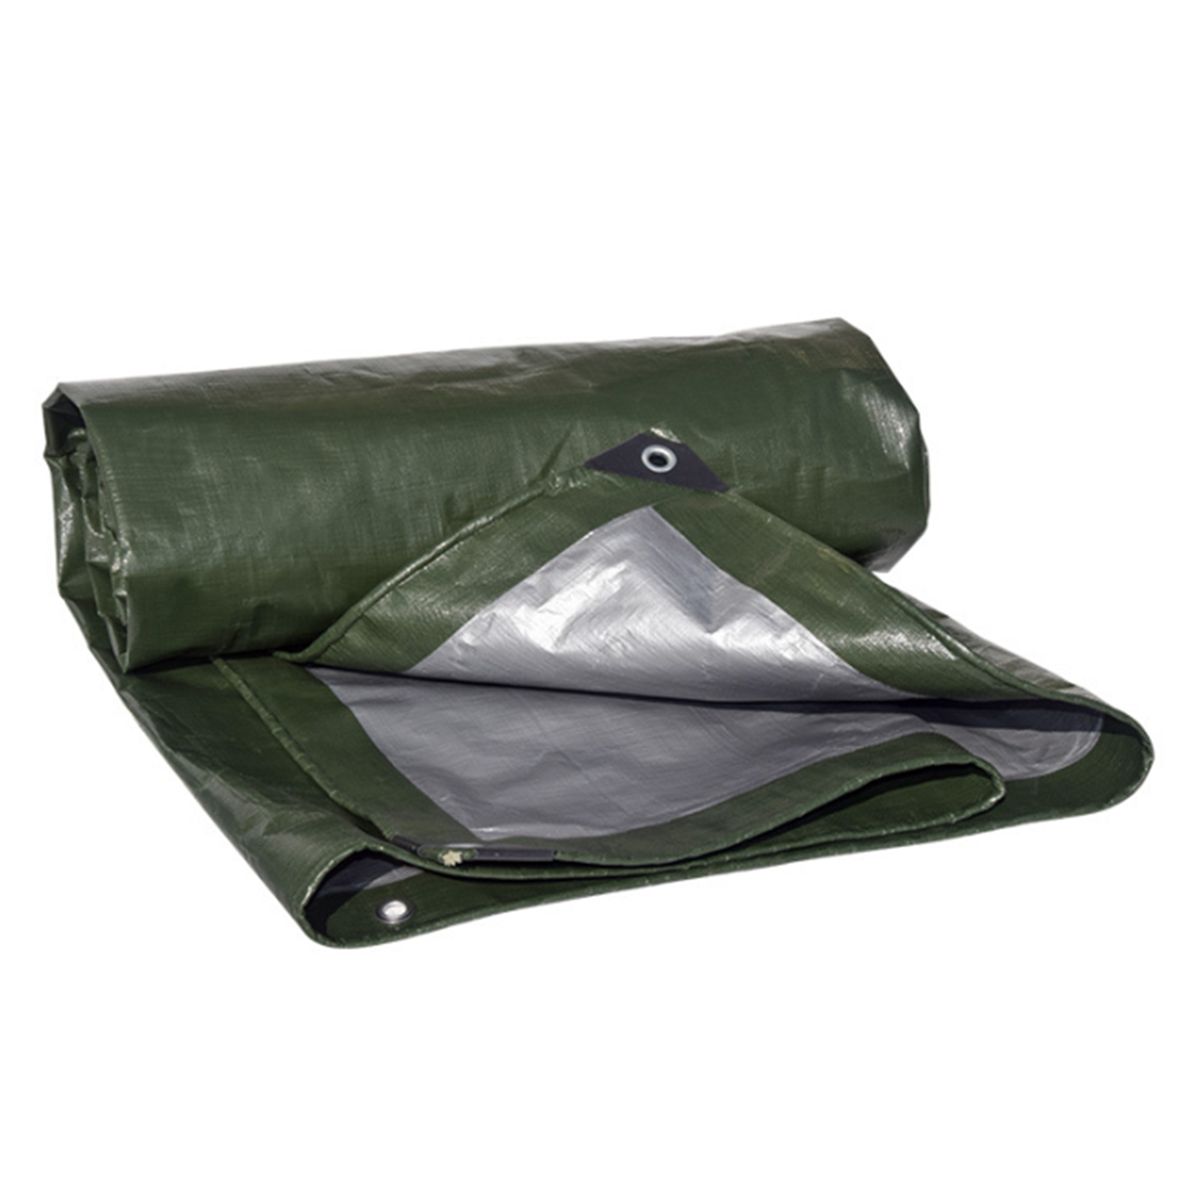 2.5m x 4m Green Tarpaulin with Eyelets | Shop Today. Get it Tomorrow ...